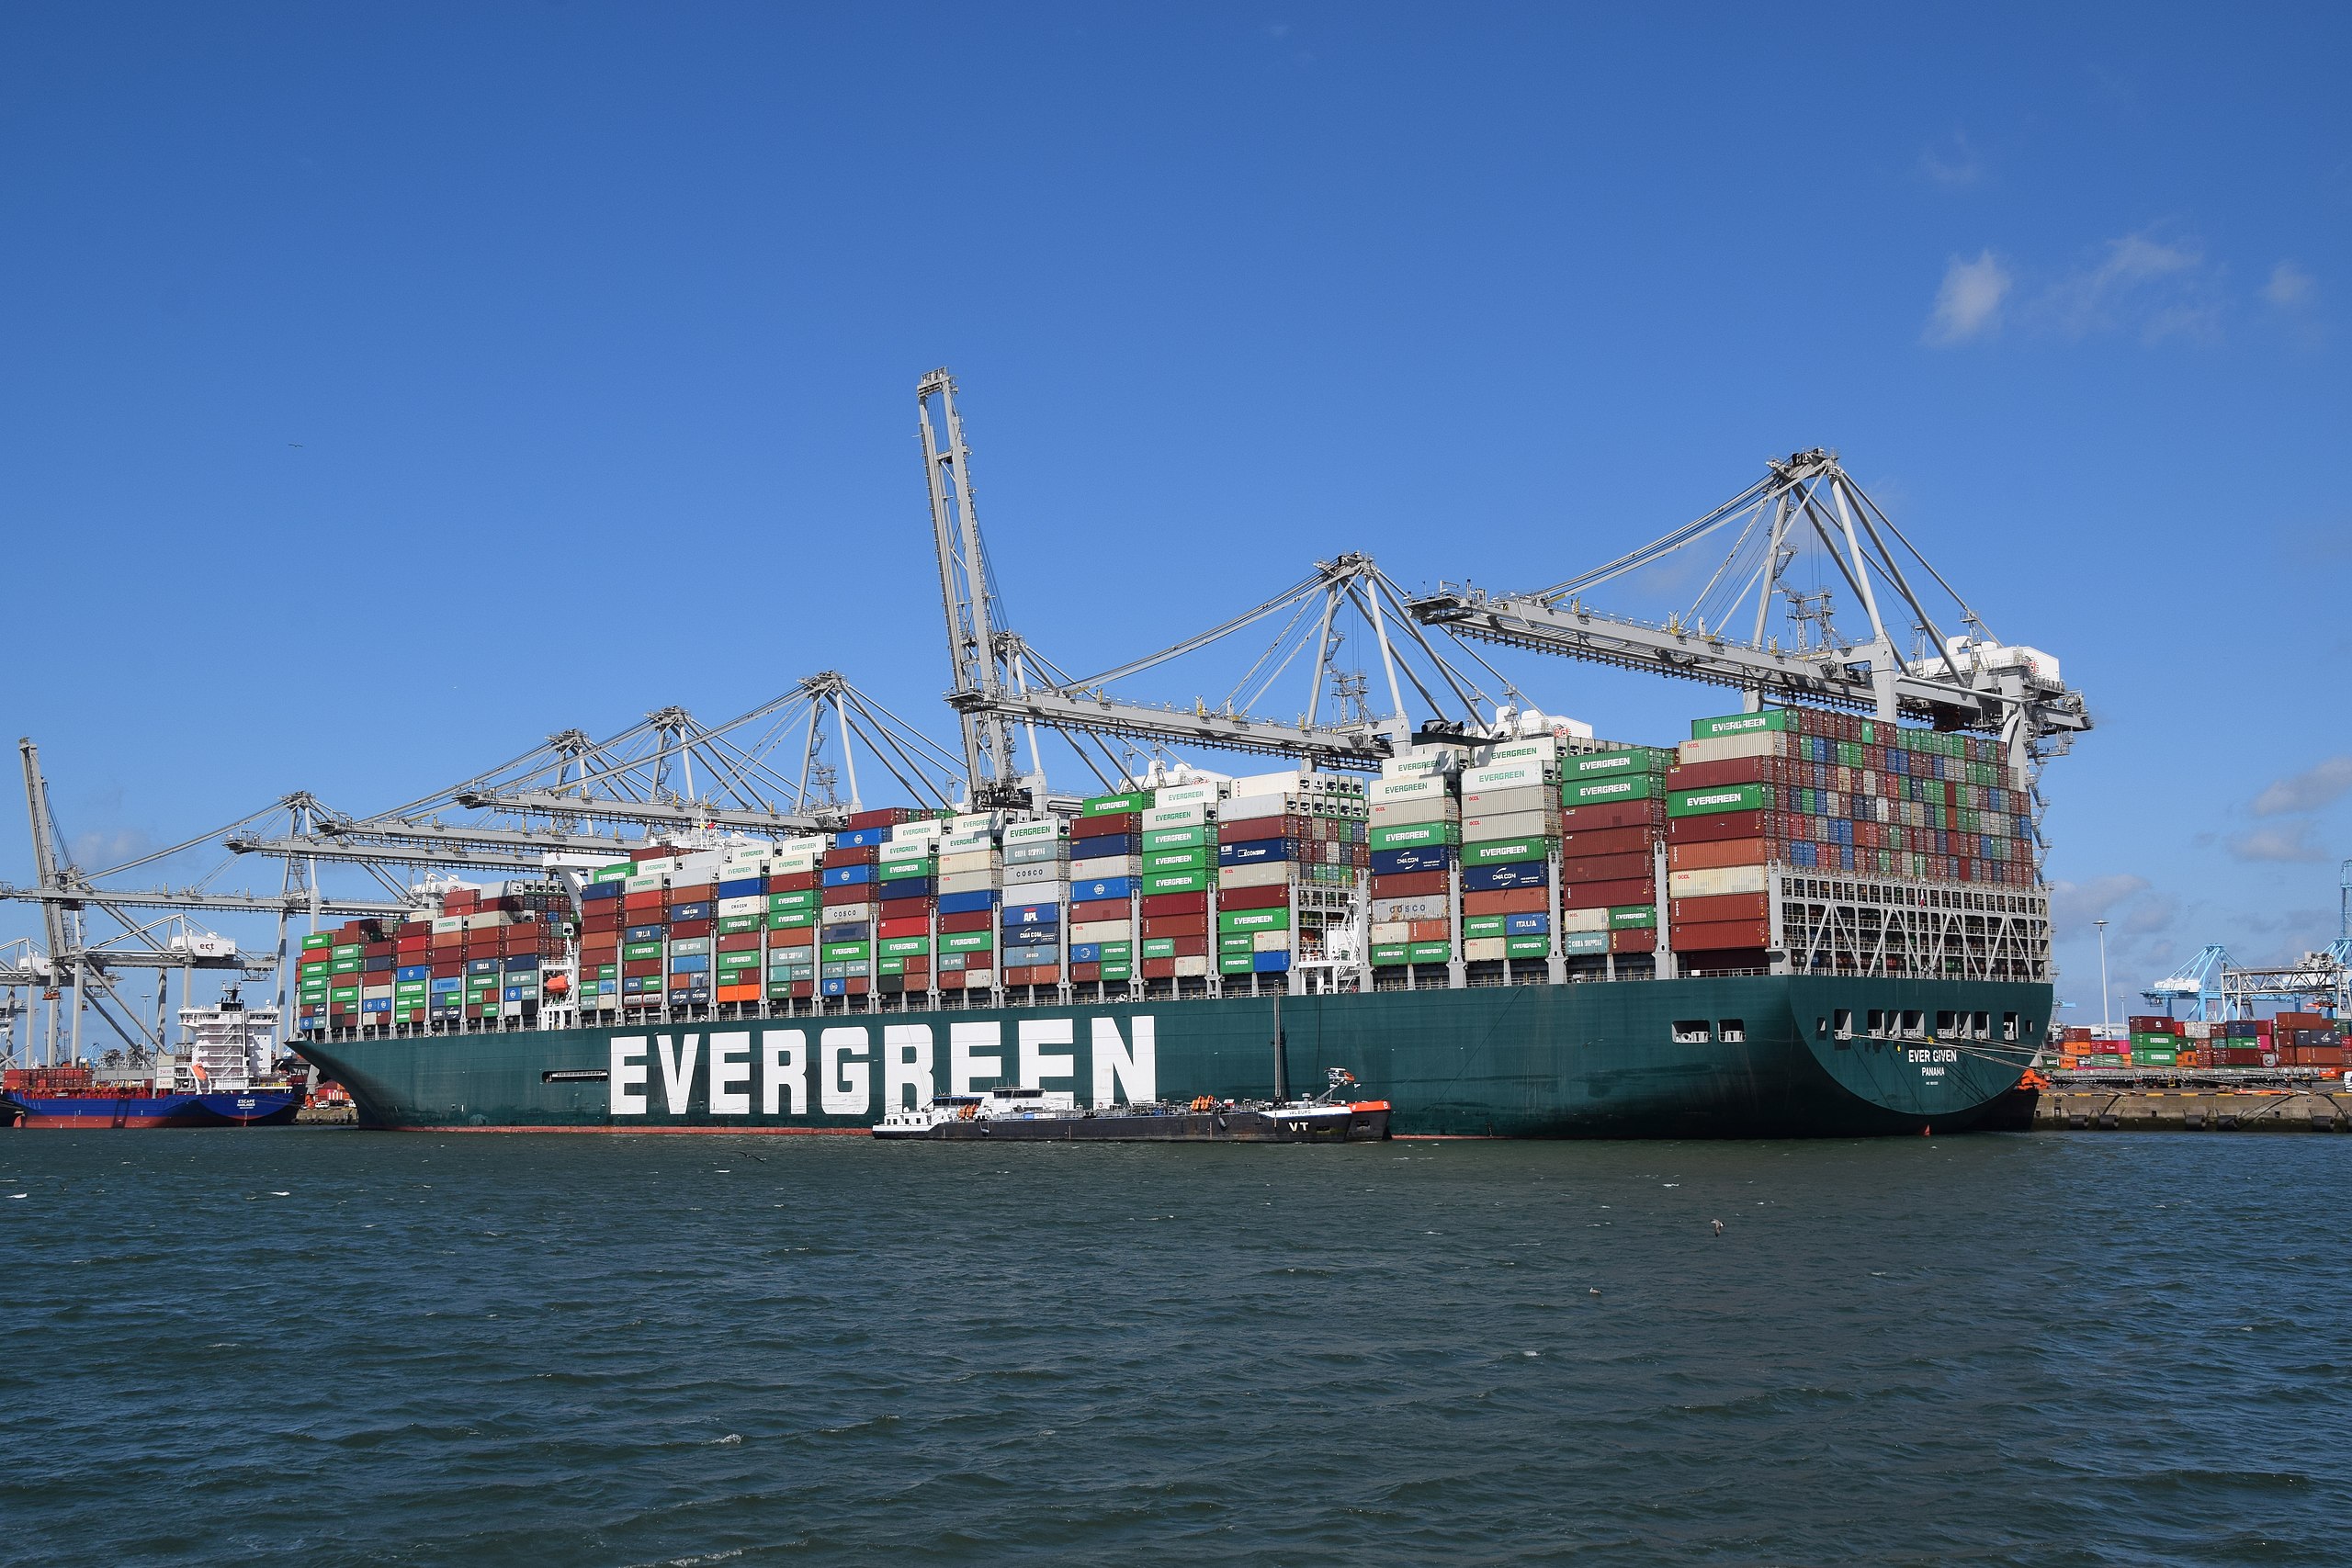 I cant write a post about marine navigation without featuring a shot of the Evergiven. This image shows her at port